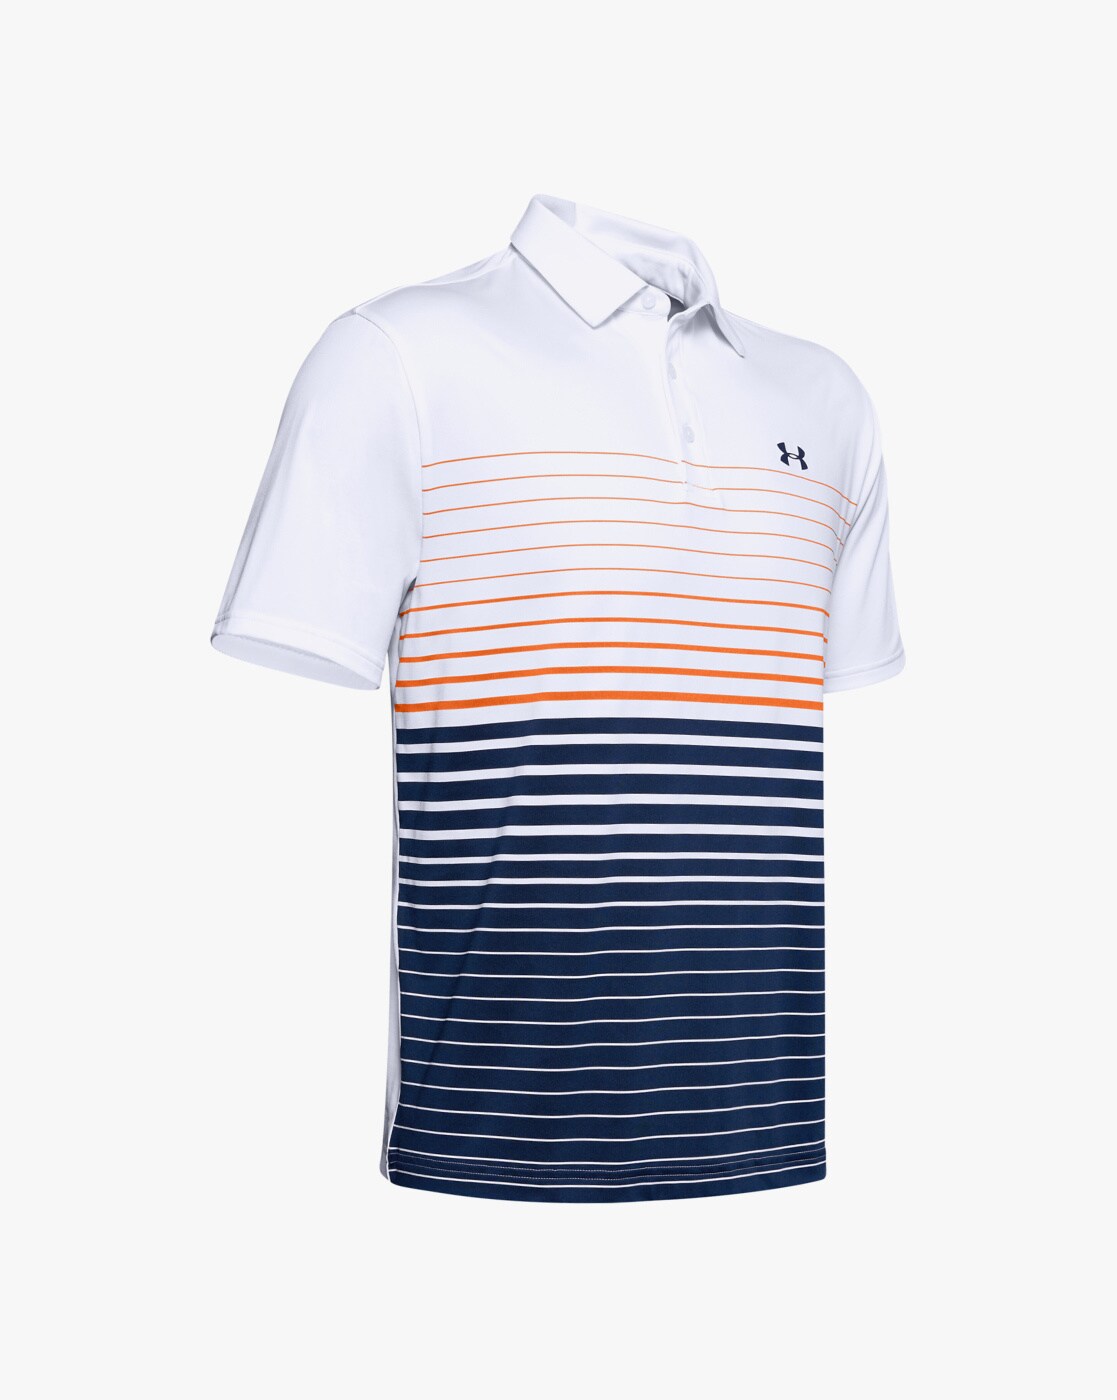 under armour polo t shirts india